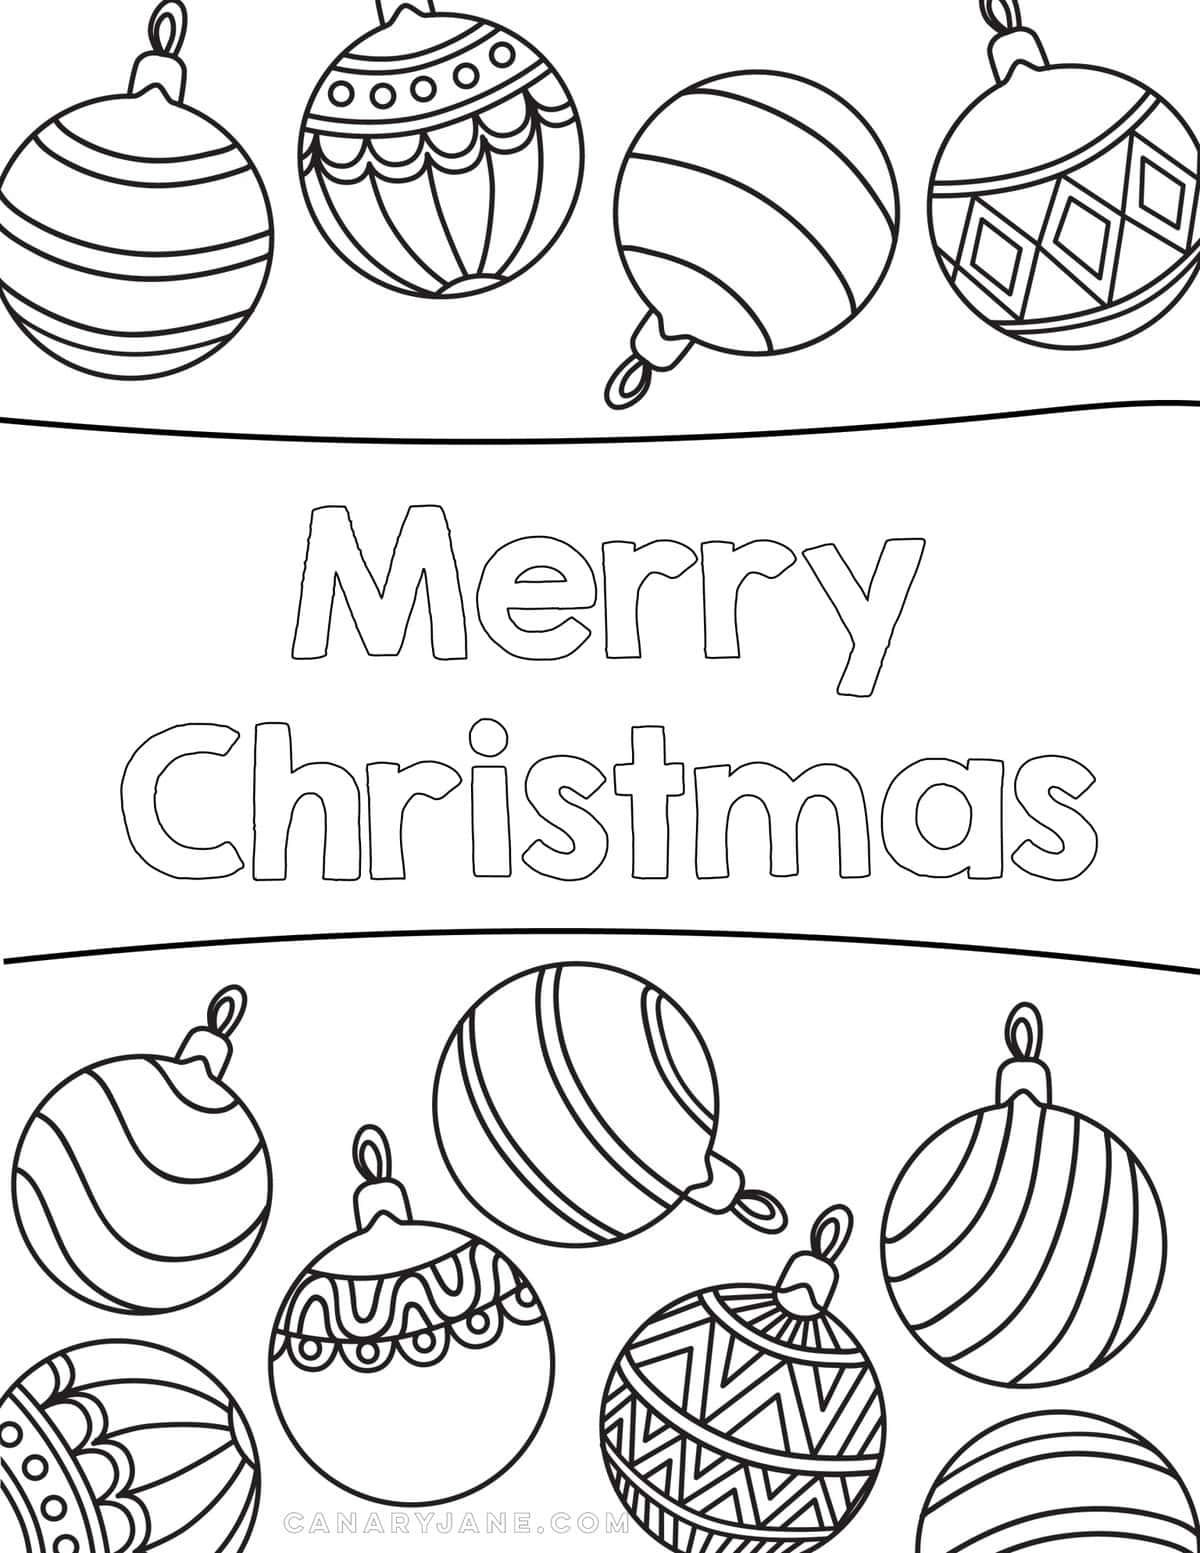 Free Christmas Coloring Pages & Printables - Design Dazzle